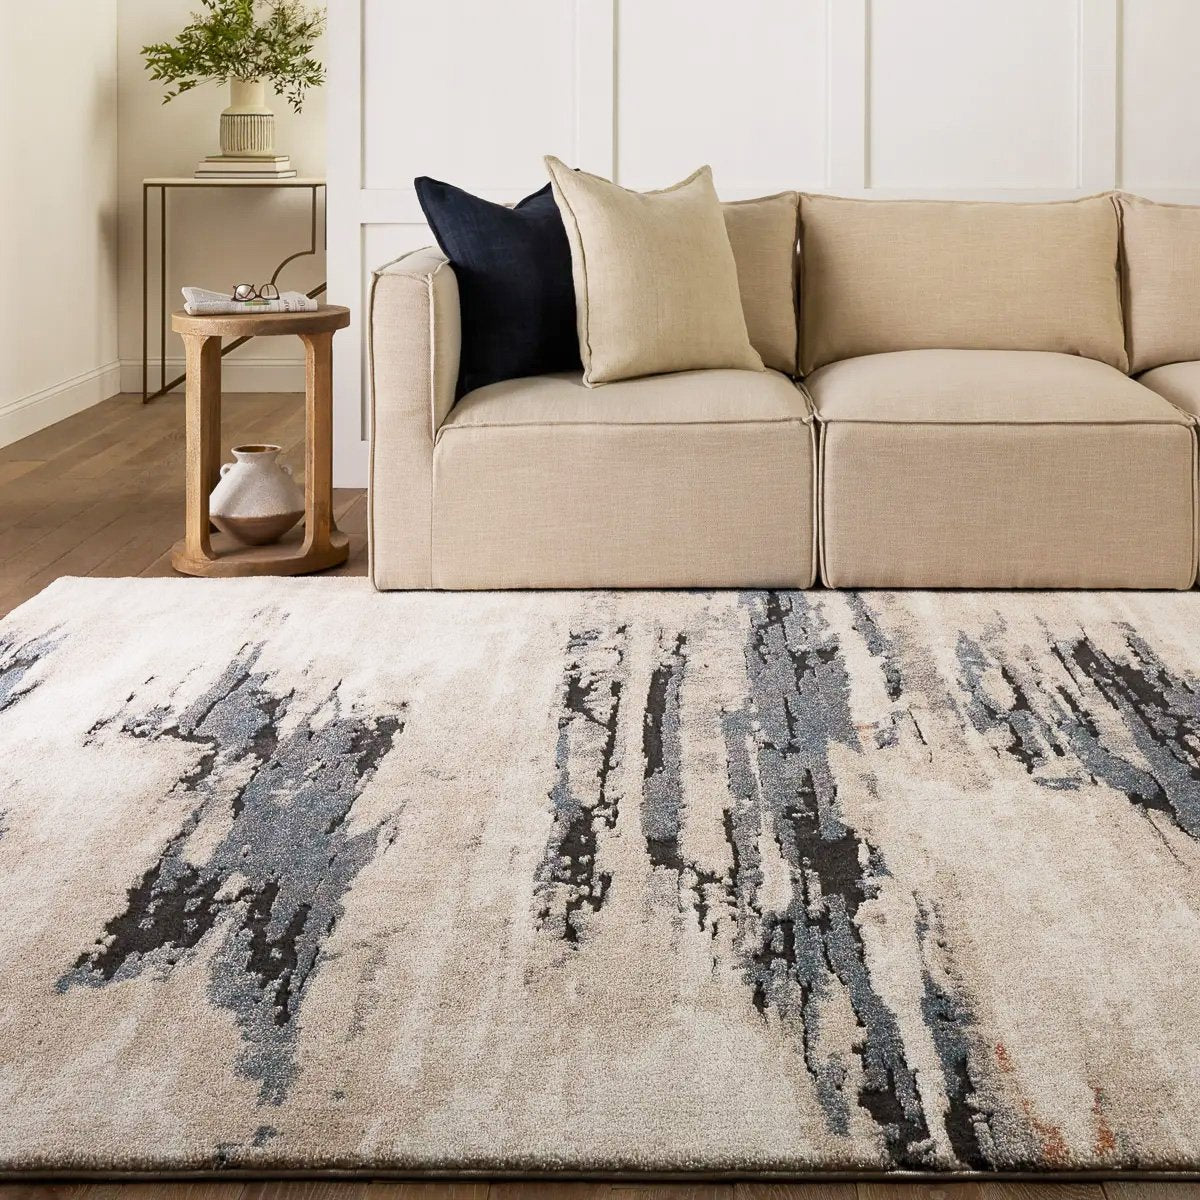 The Formation Polar Rug displayed in a living room, showcasing its versatility and modern appeal.